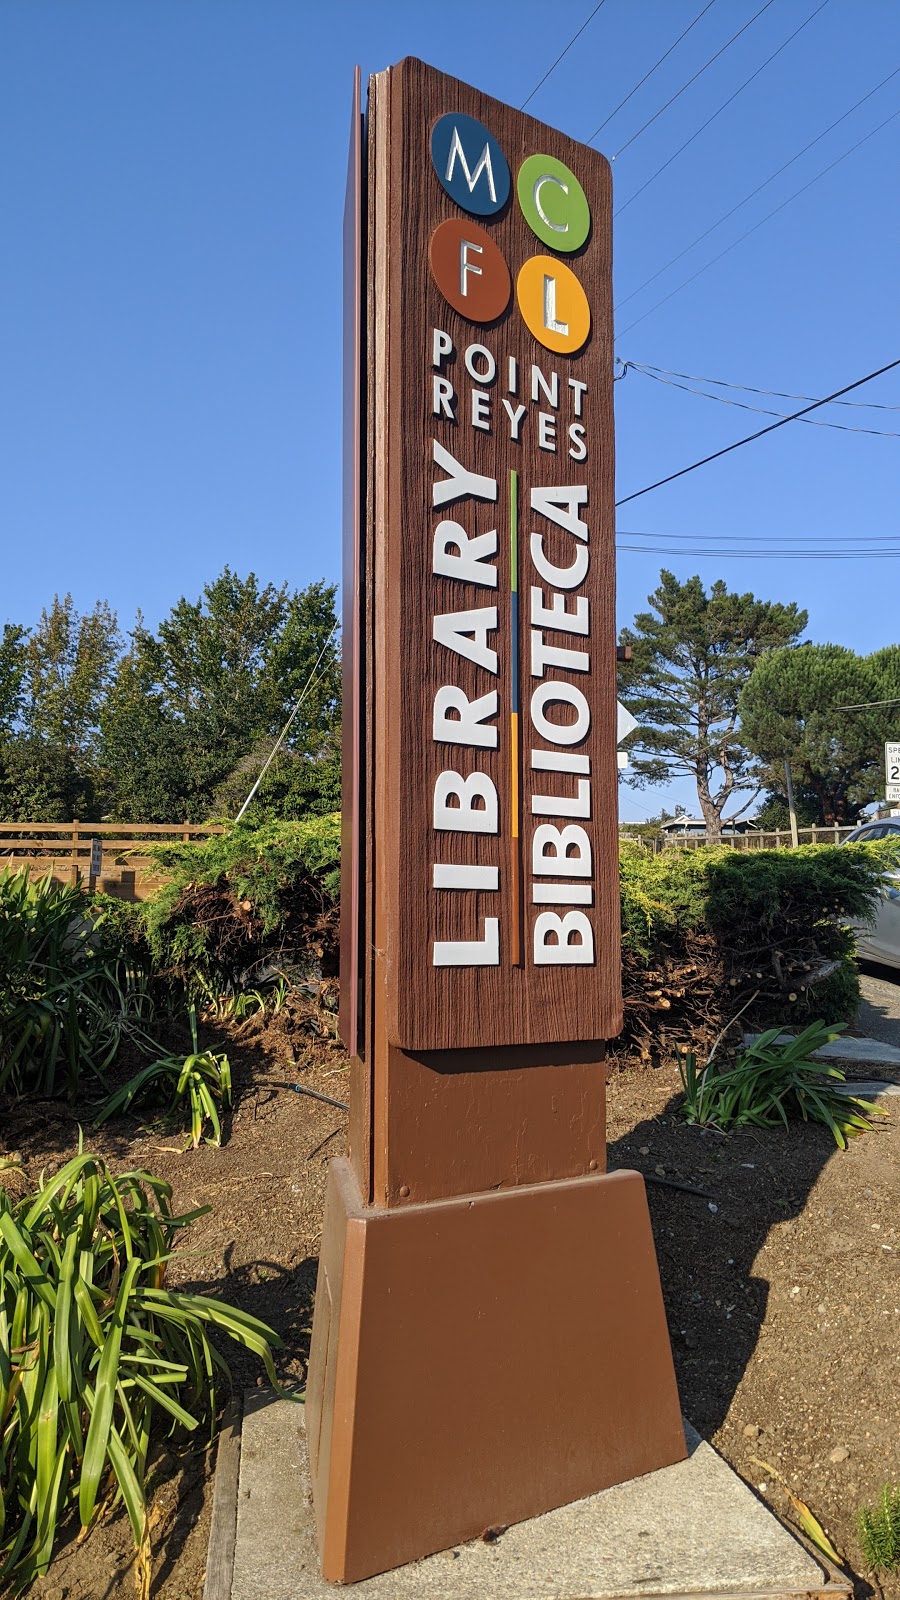 Point Reyes Station Library | 11435 CA-1, Point Reyes Station, CA 94956 | Phone: (415) 663-8375